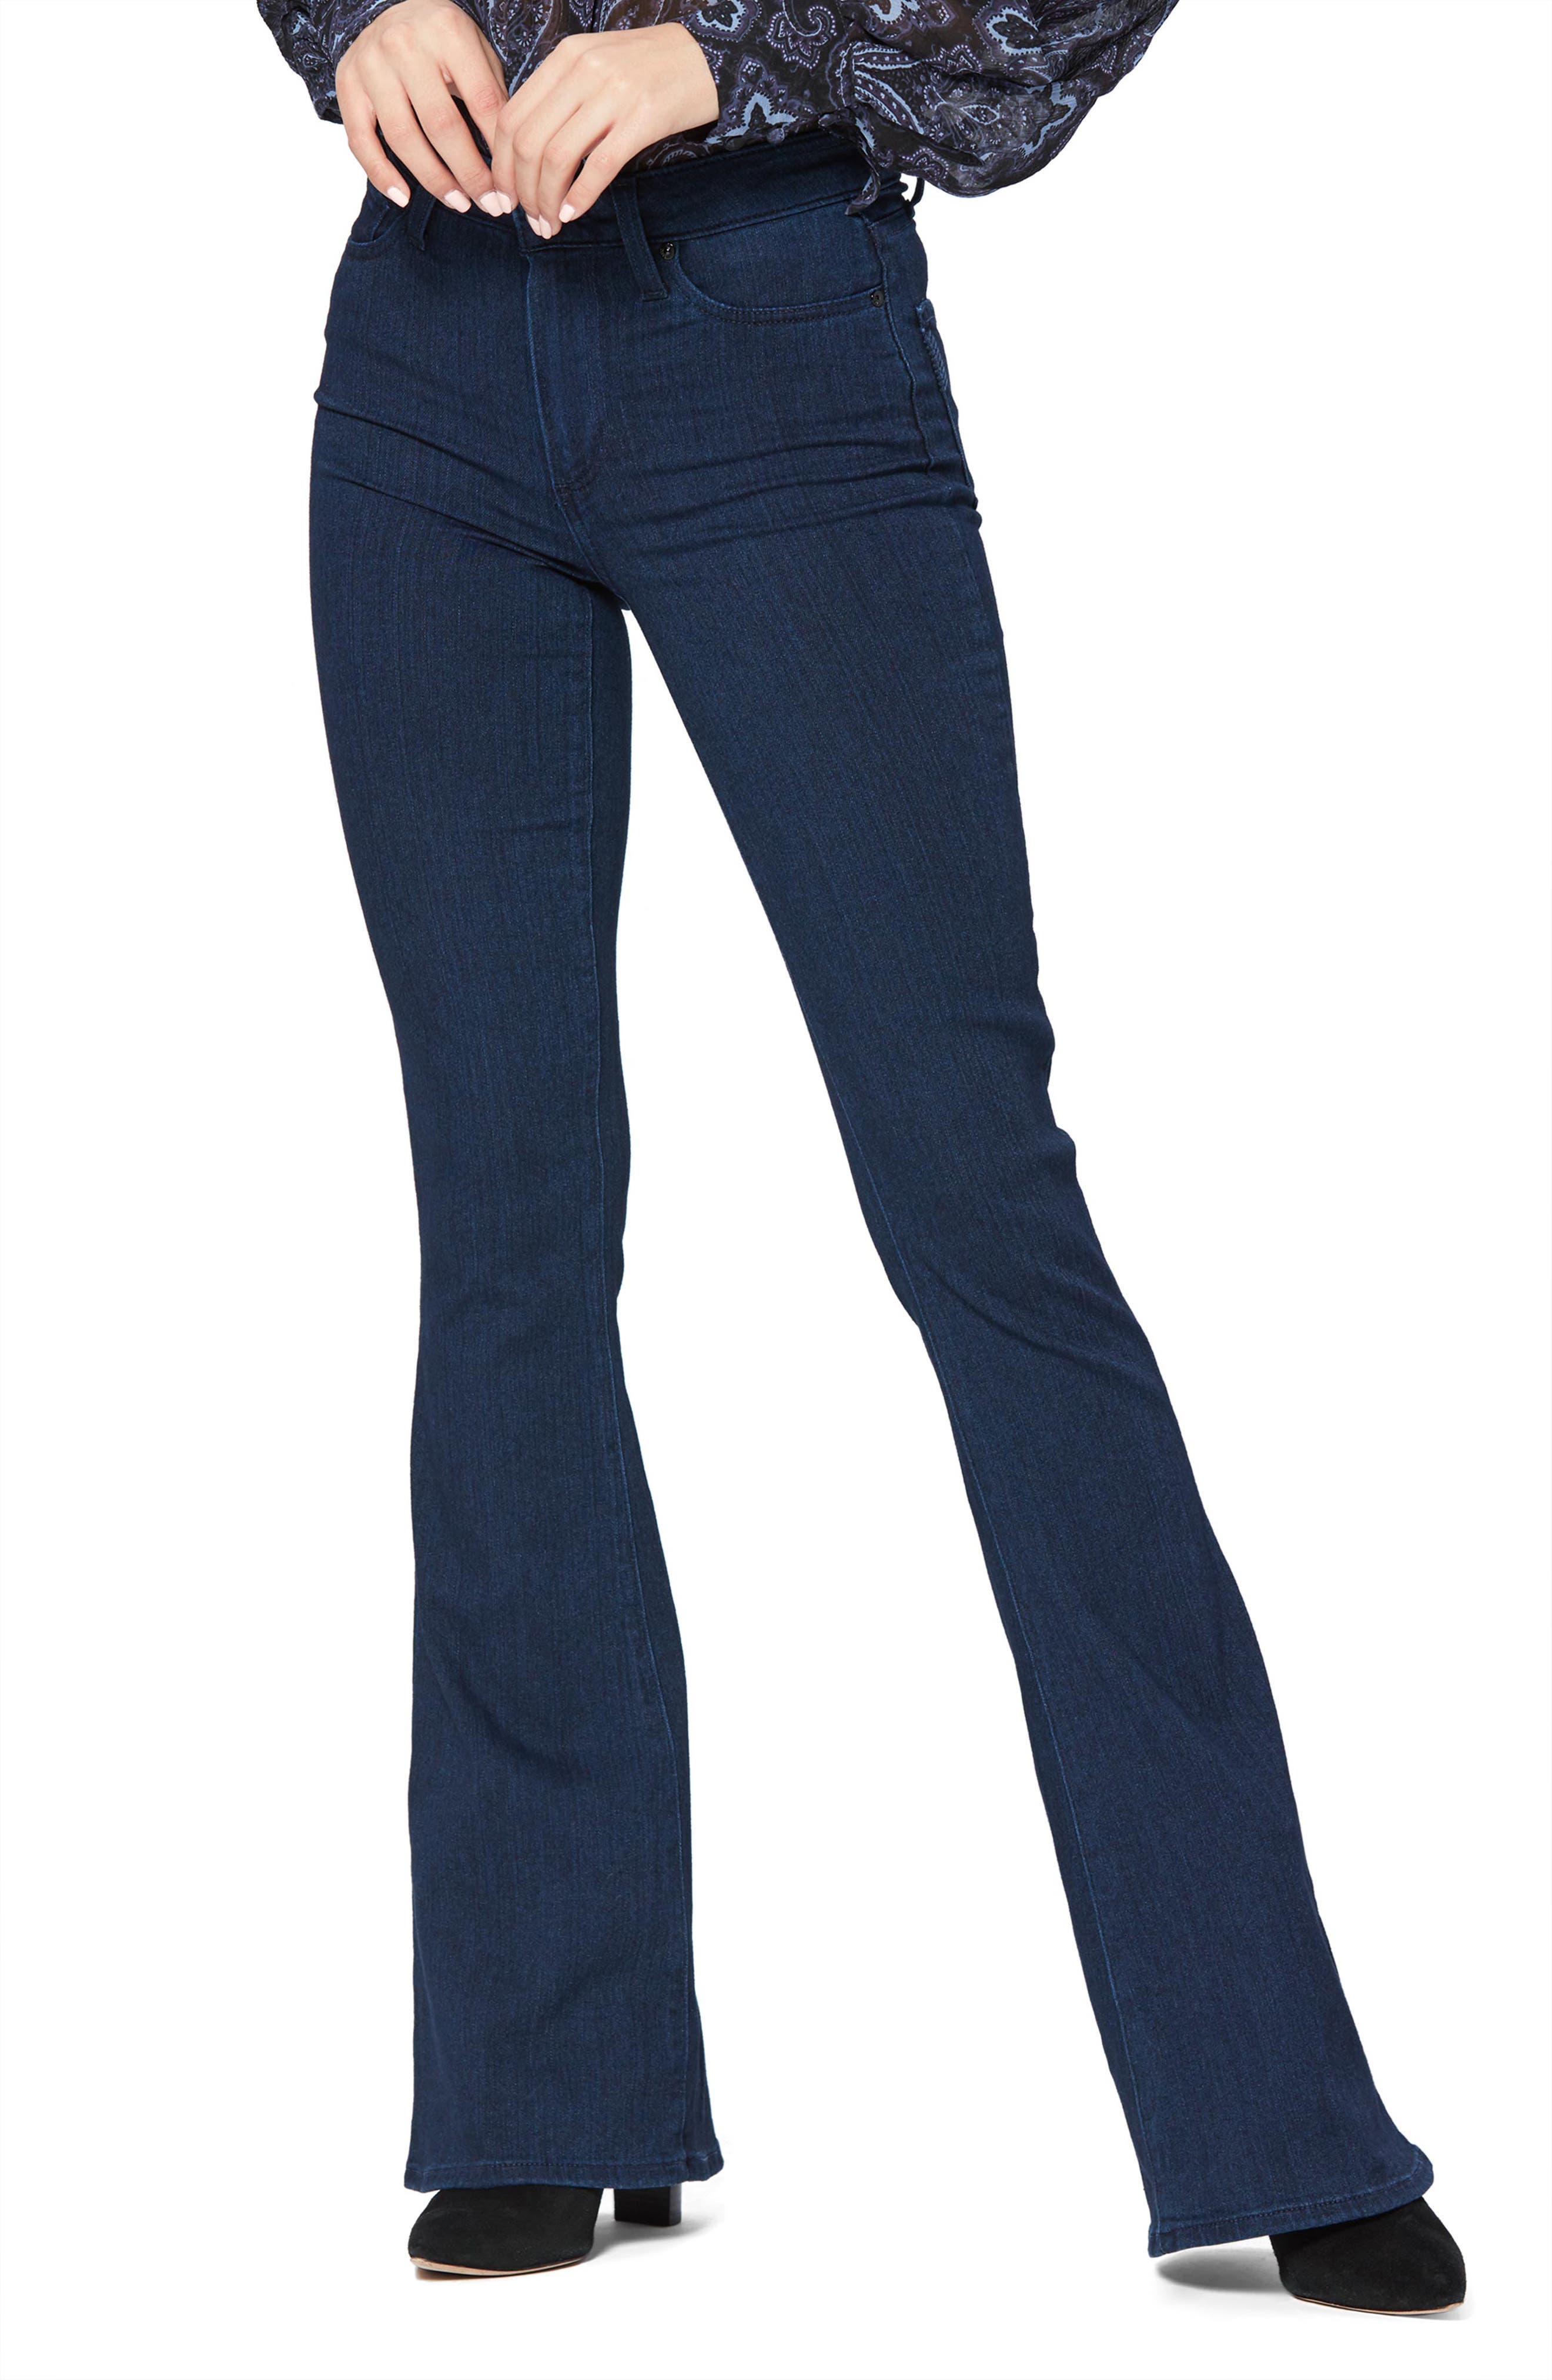 high waisted bell bottom jeans petite